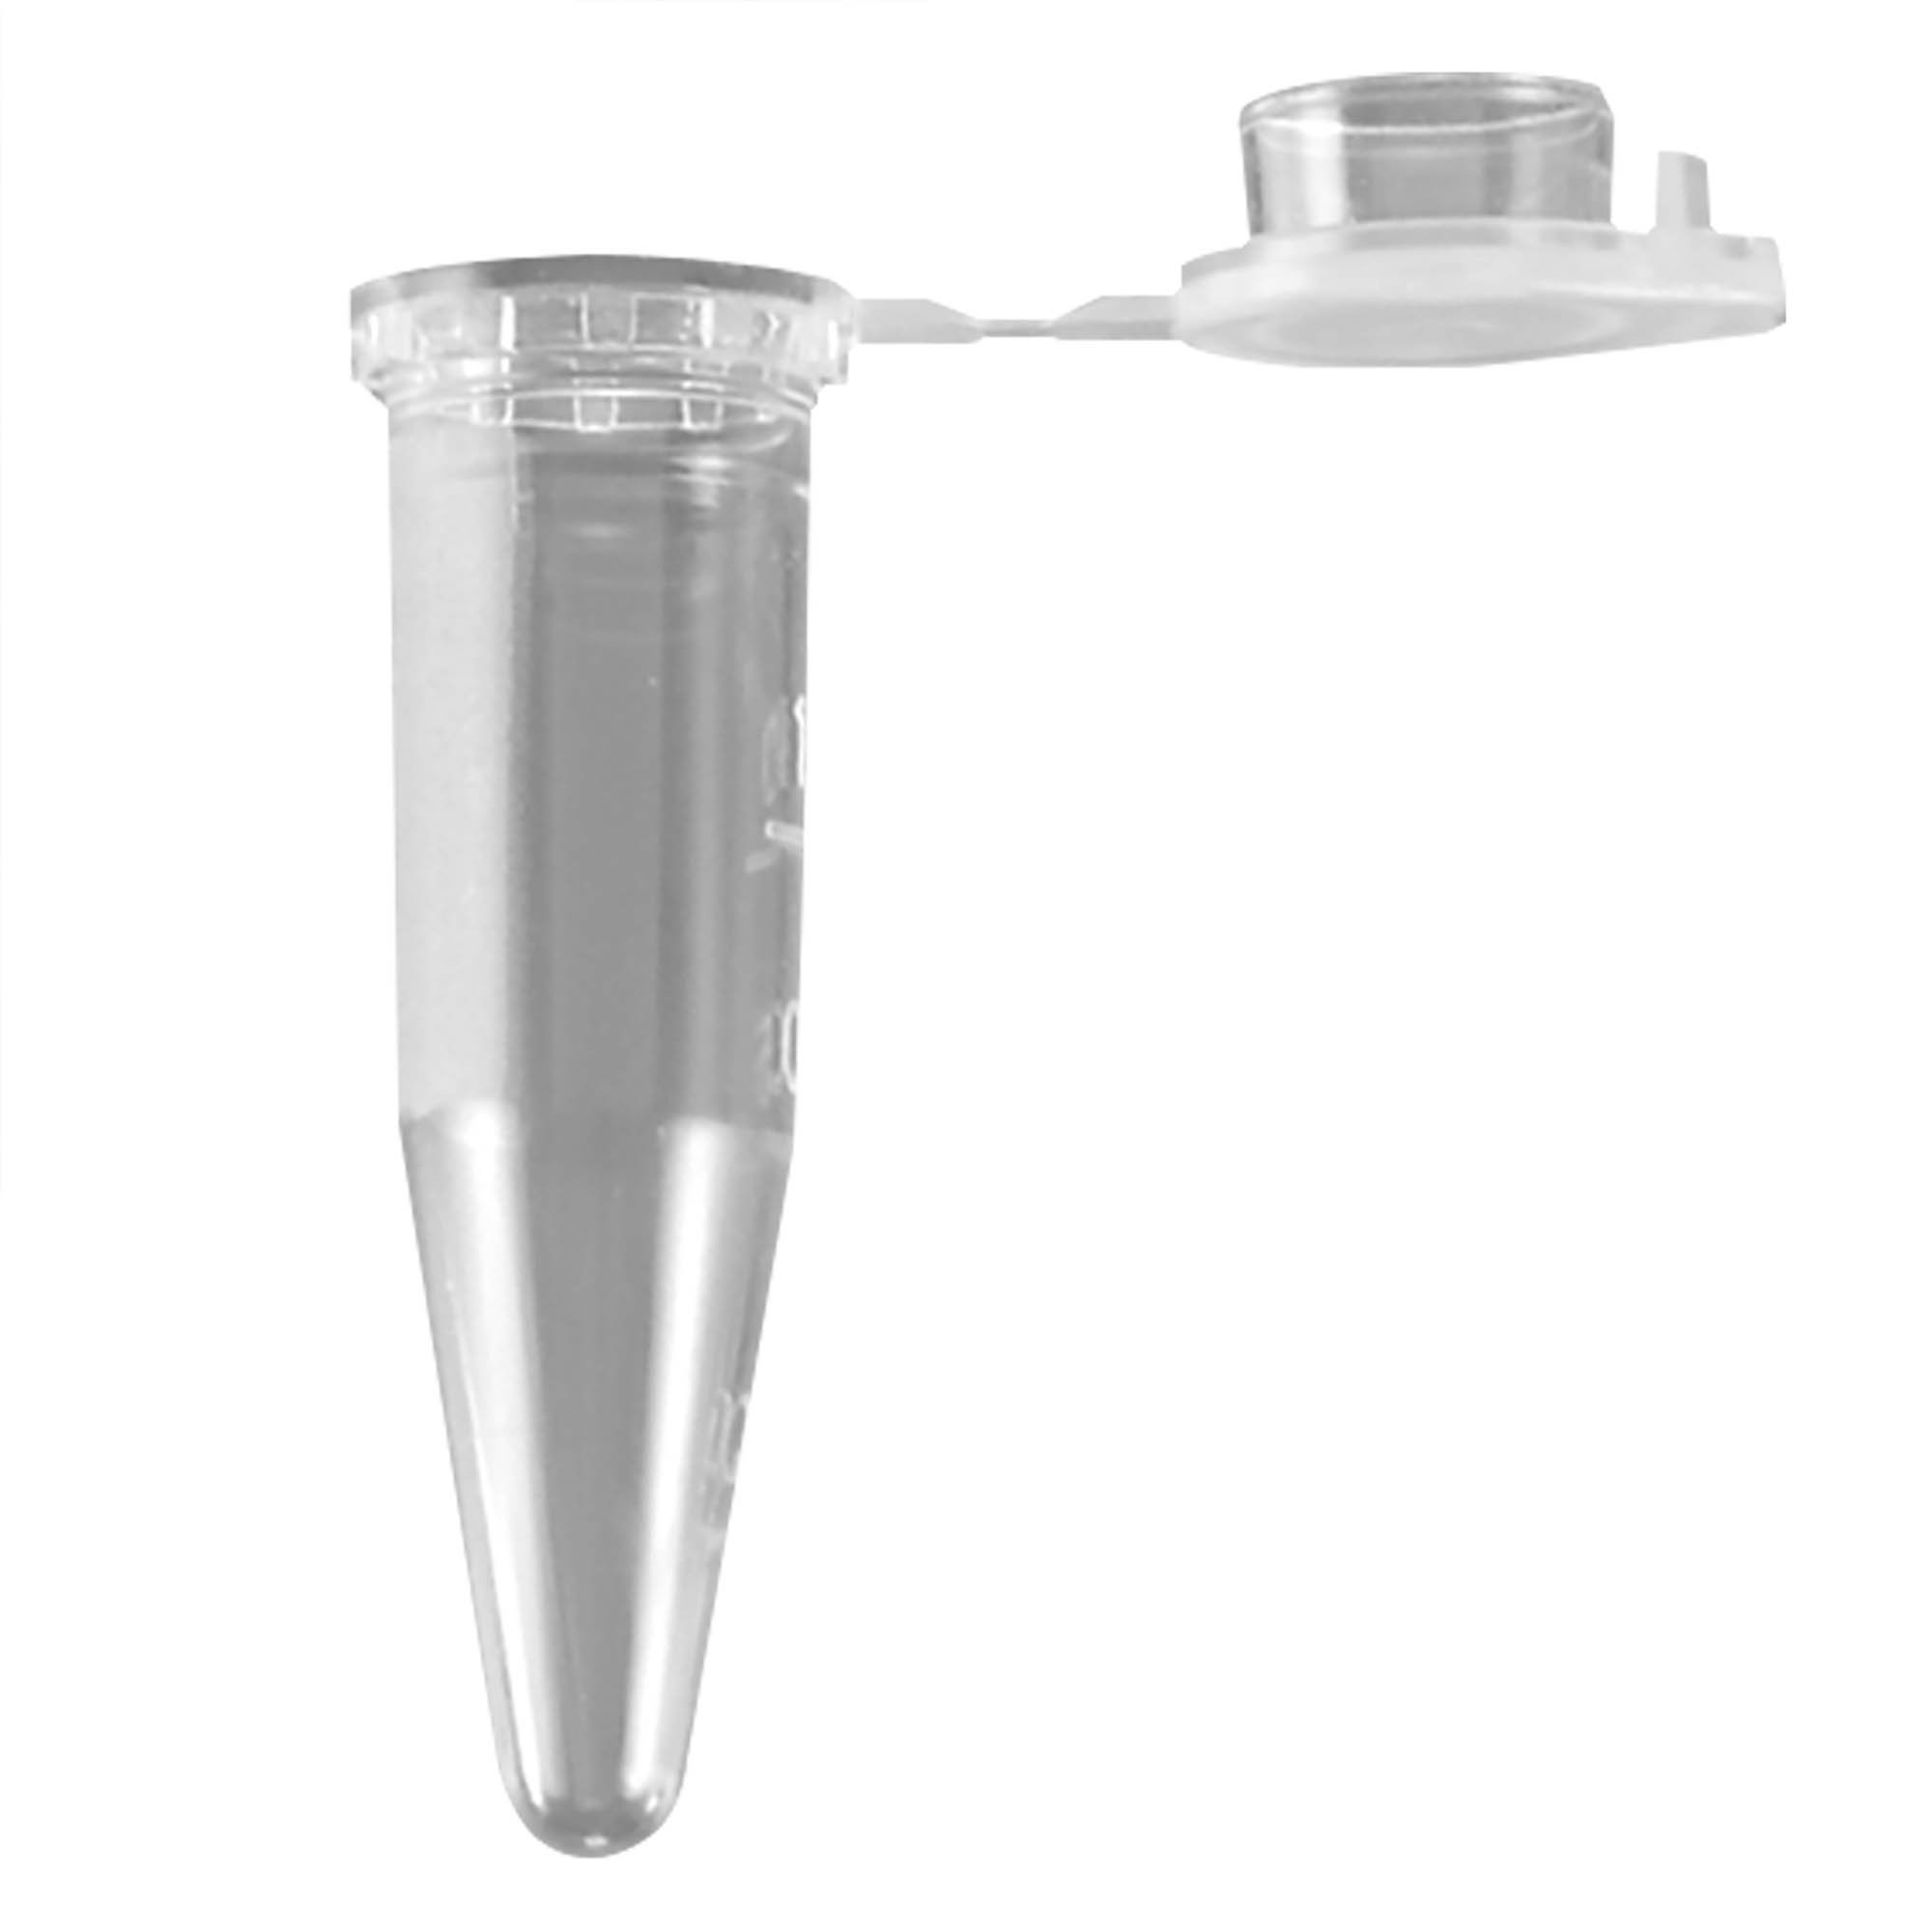 Microcentrifuge Tube with Locktop Style Cap - 1.5mL, Pack of 500